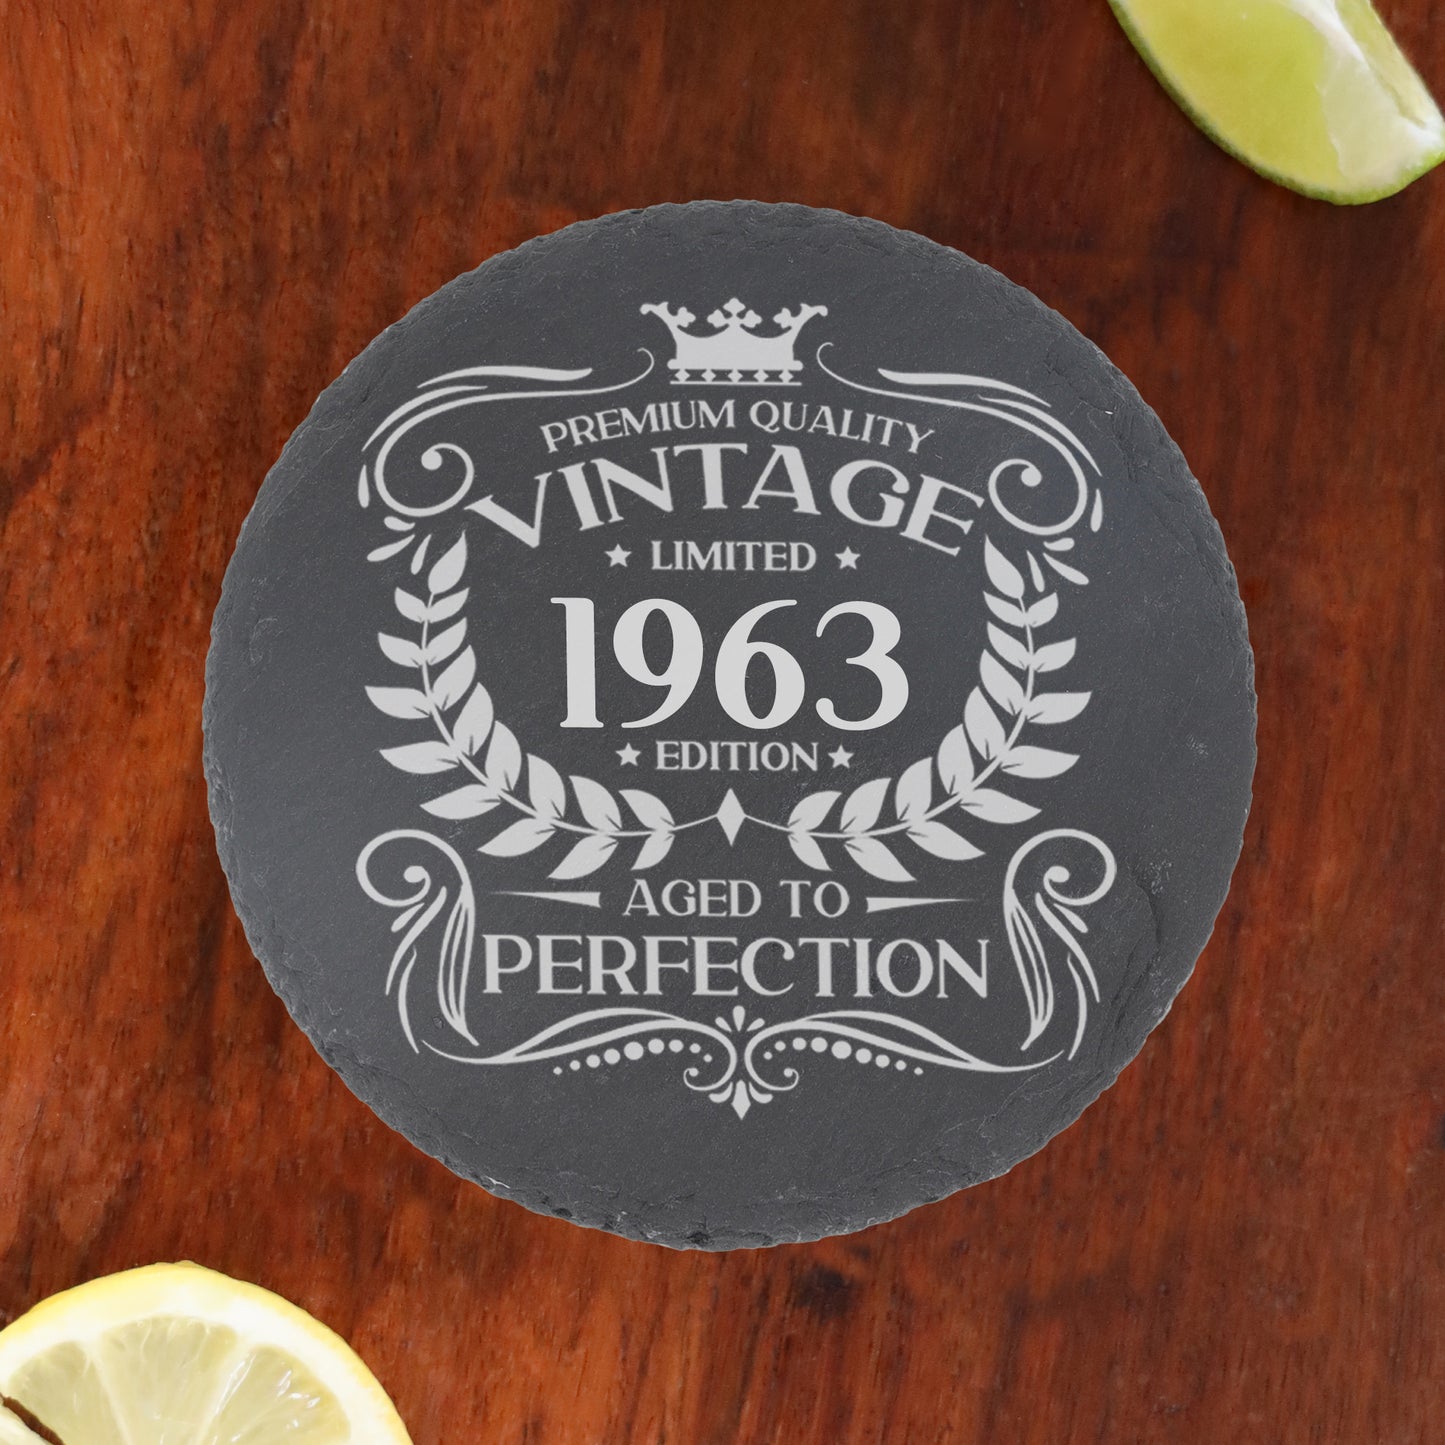 Personalised Vintage 1963 Mug and/or Coaster  - Always Looking Good - Round Coaster On Its Own  